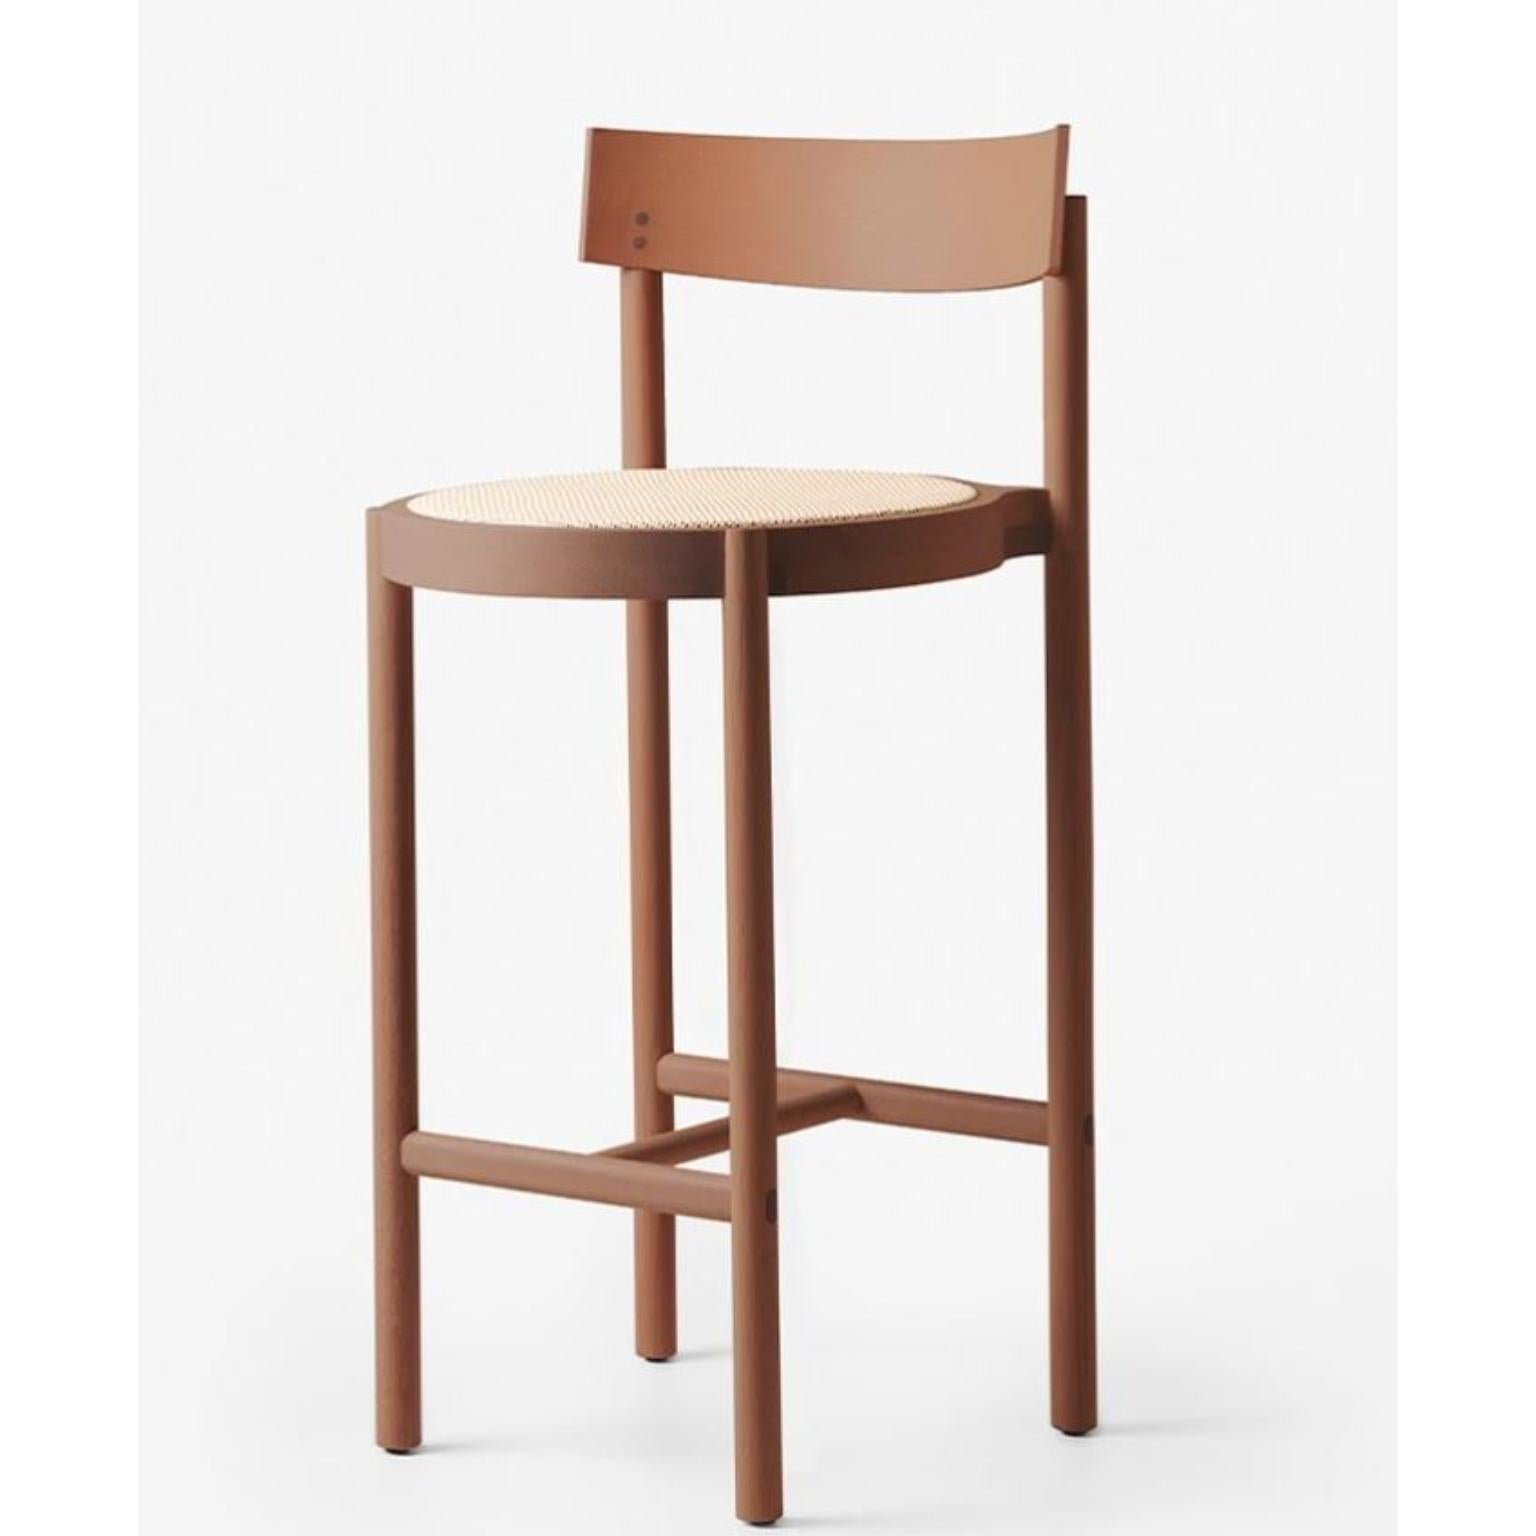 Brown Gravatá Counter Stool by Wentz
Dimensions: D 52 x W 47 x H 90 cm
Materials: Tauari Wood, Cane/Upholstery.
Weight: 4,4kg / 9,7 lbs

The Gravatá series synthesizes our vision regarding the functional and visual simplicity of furniture. Through